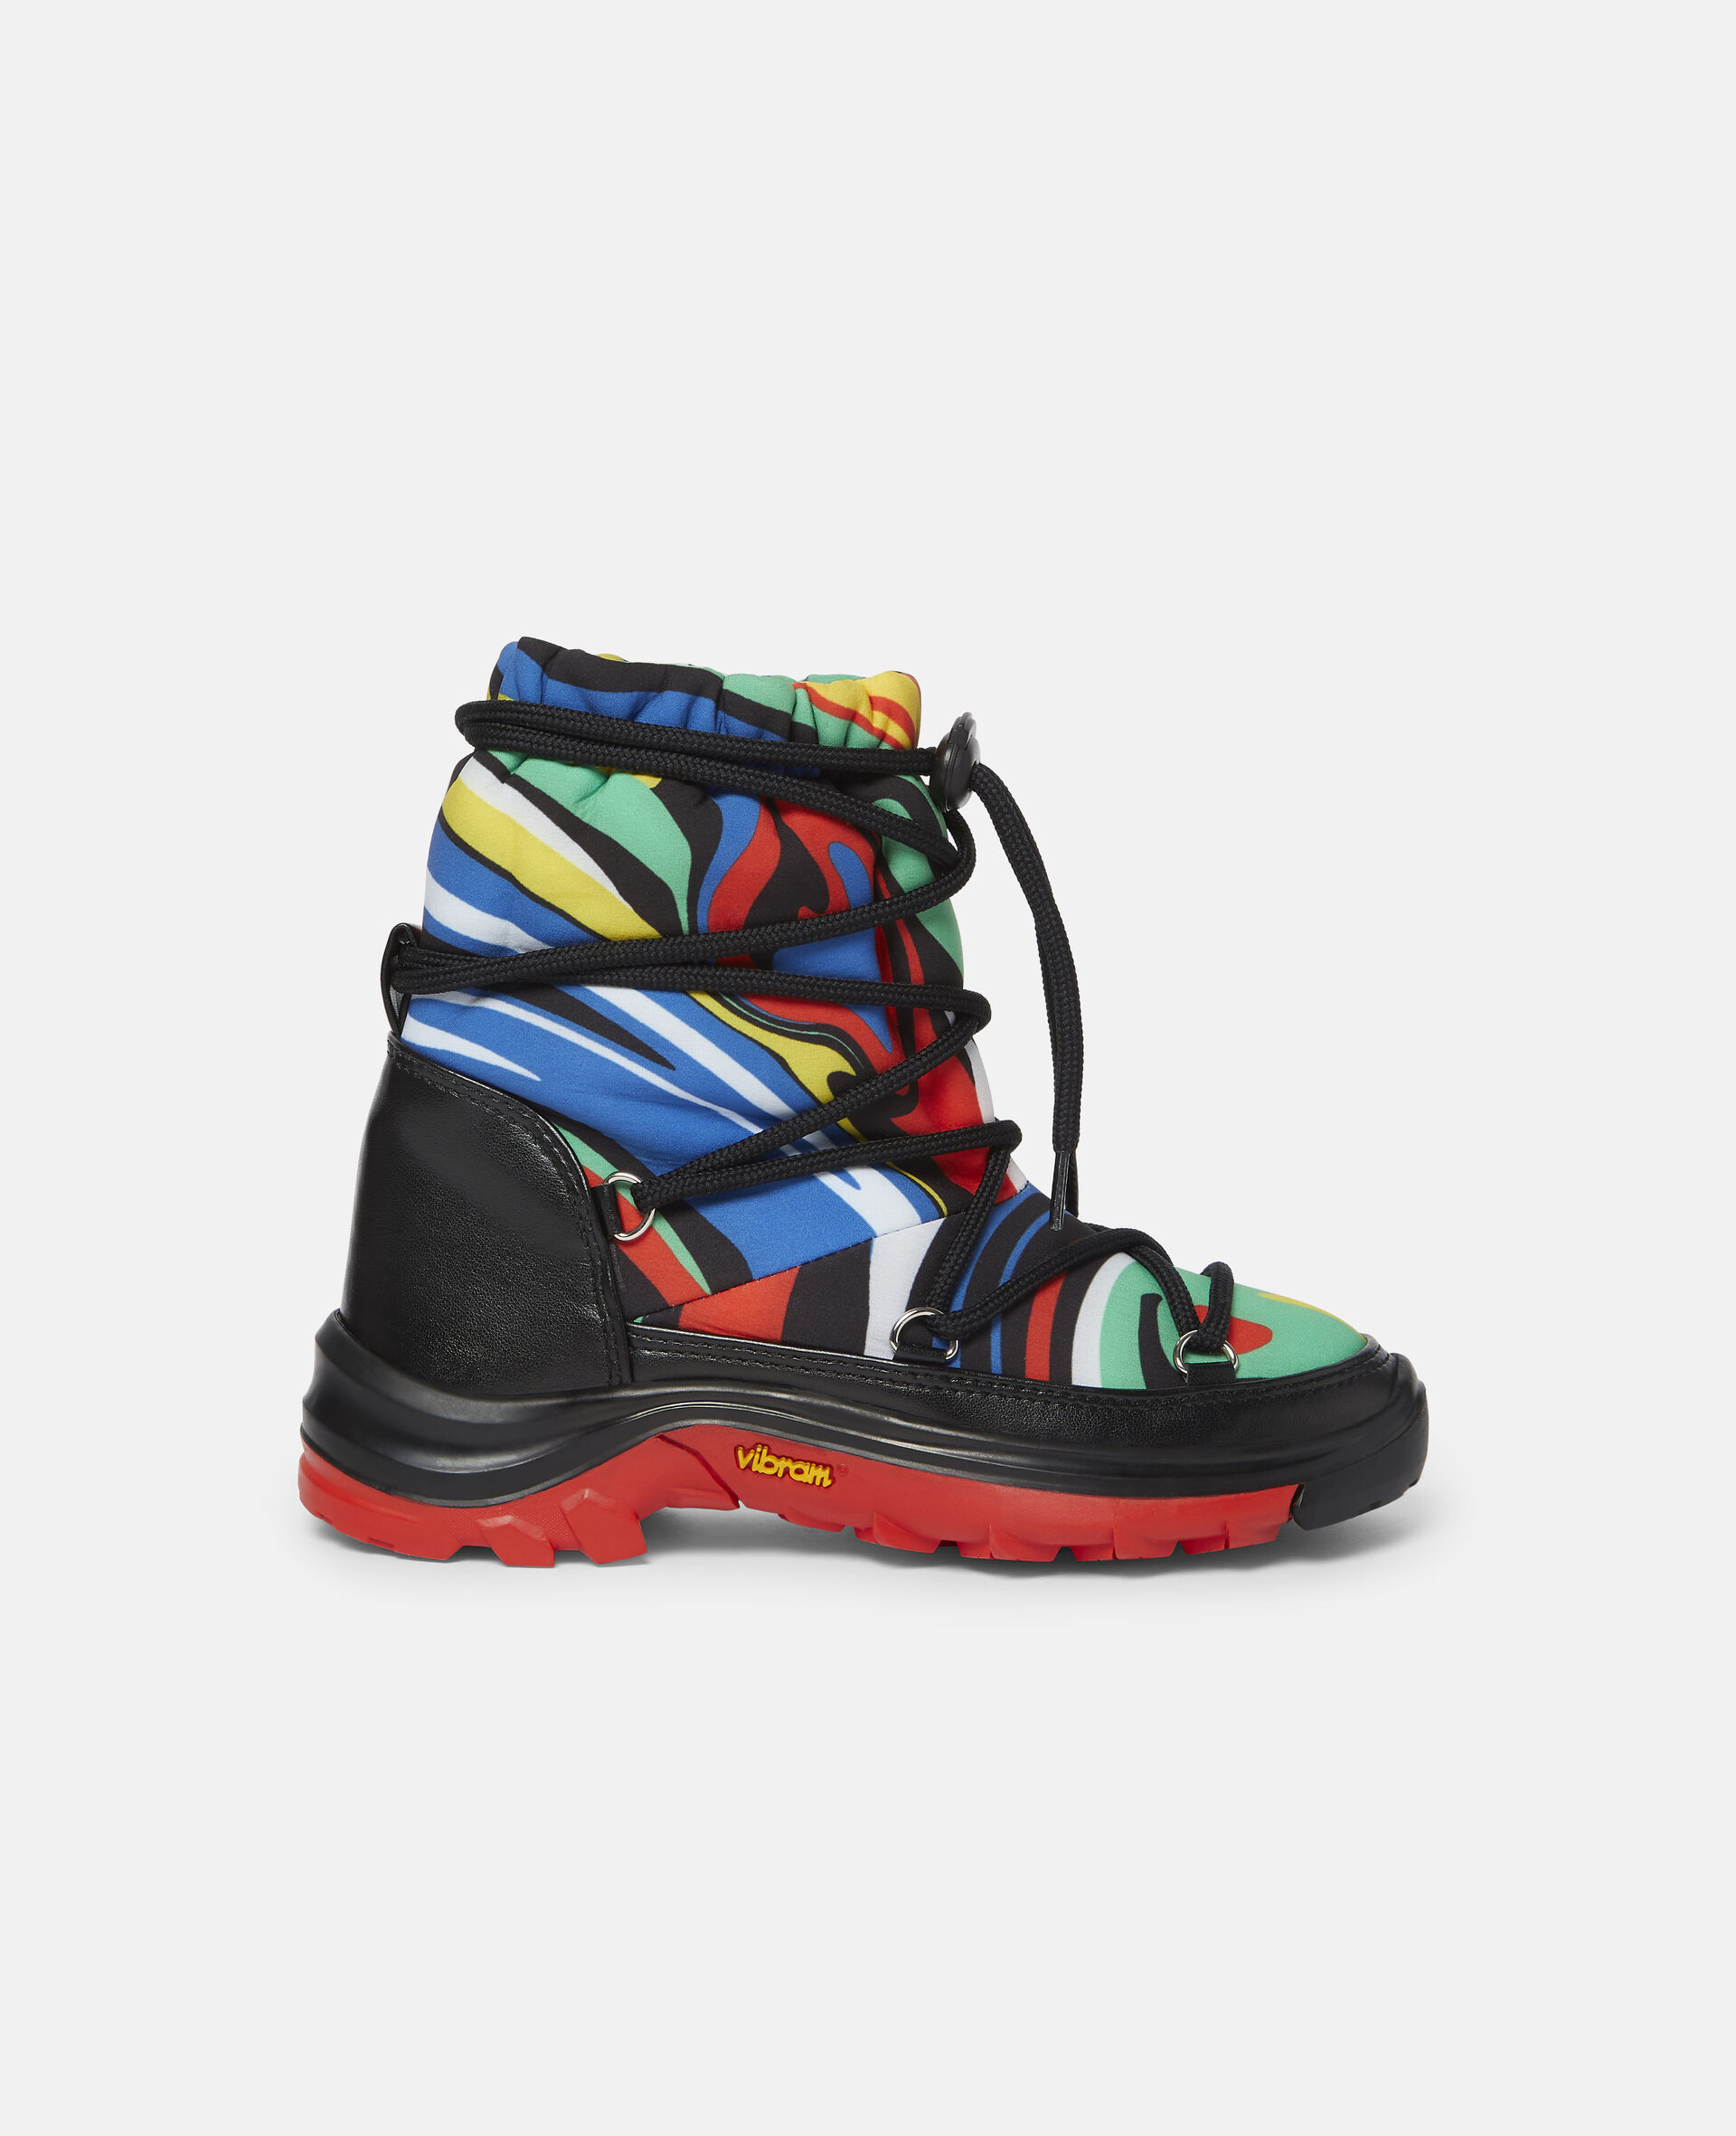 Marble Ski Boots-Multicolour-large image number 0